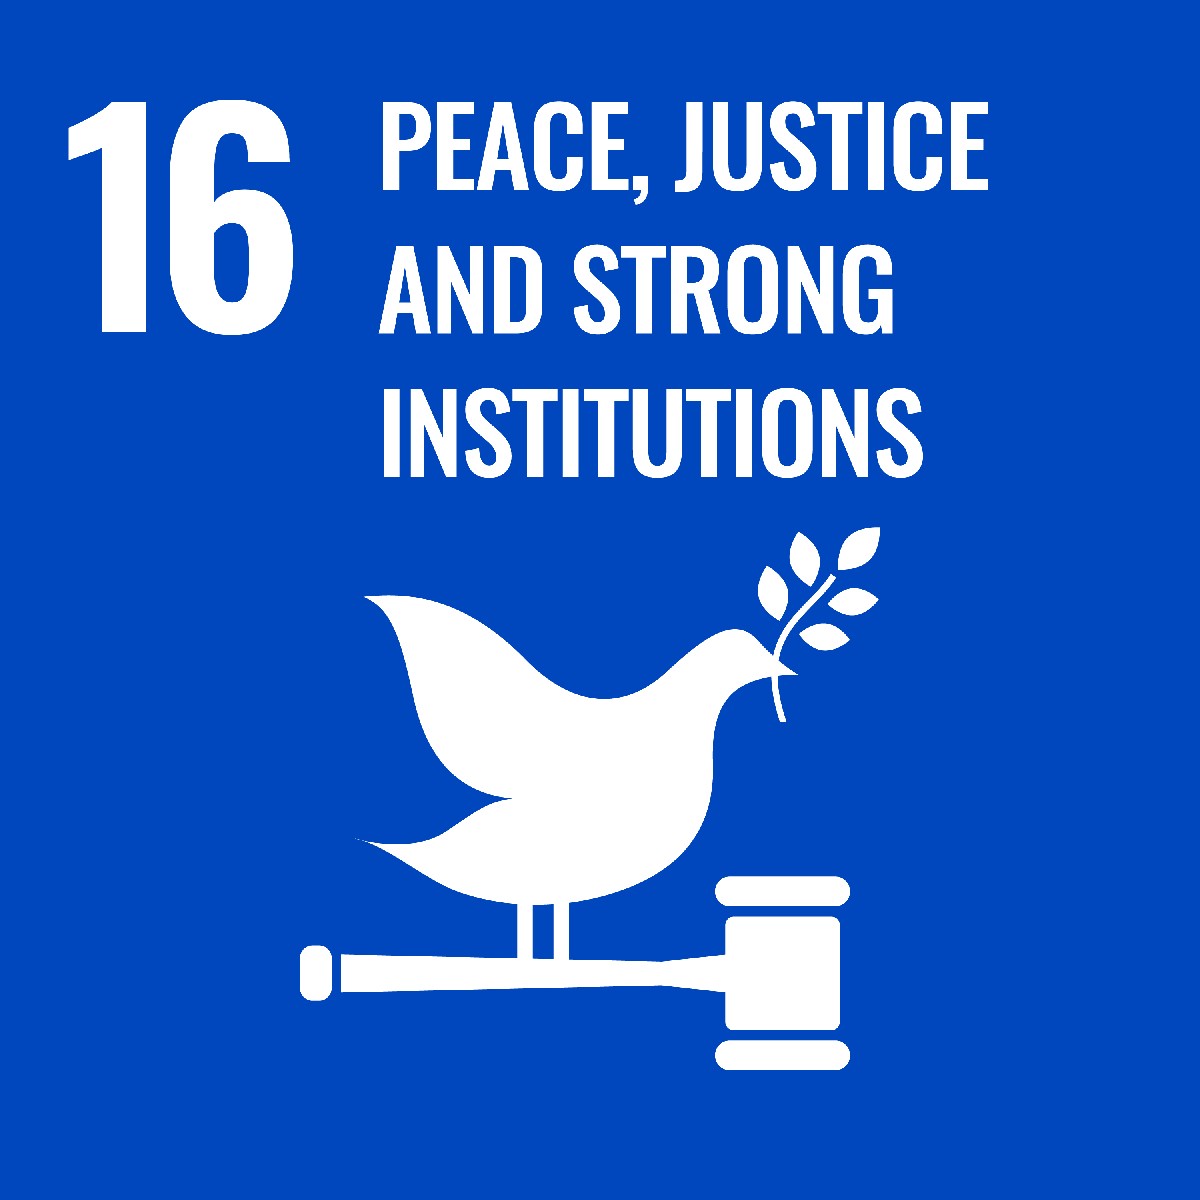 icon for sustainable development goal peace, justice and strong institutions